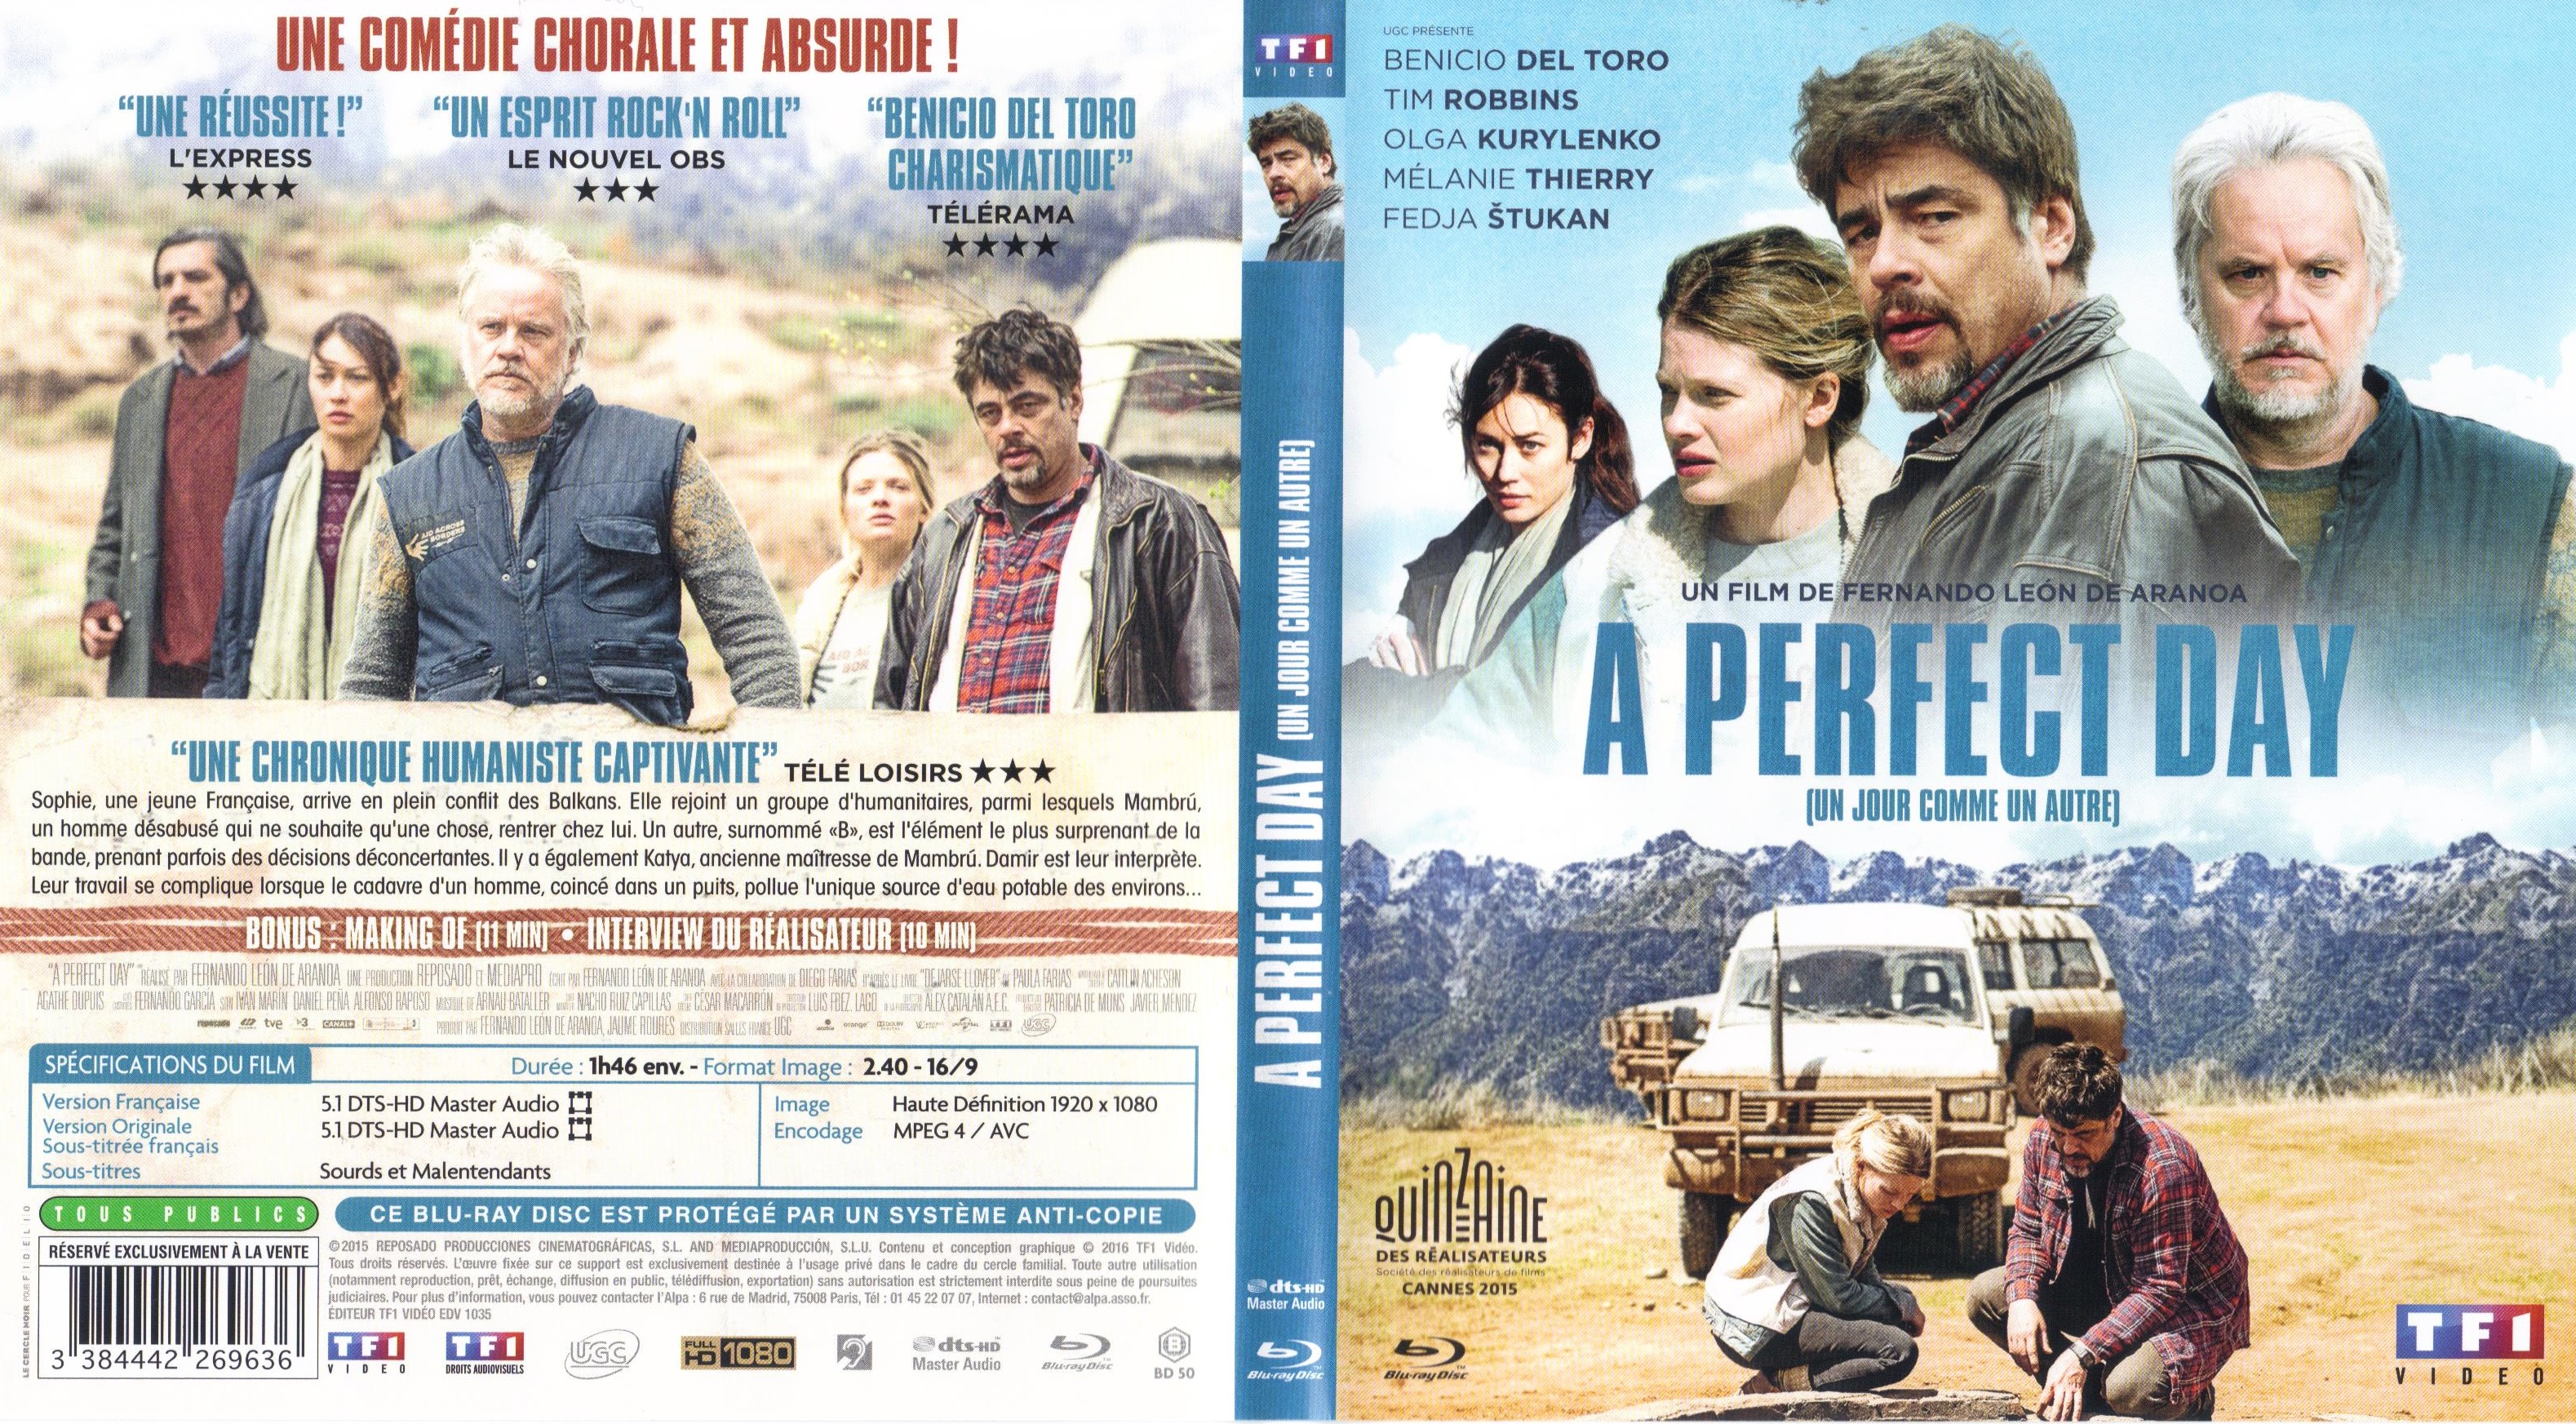 Jaquette DVD A perfect day (BLU-RAY)